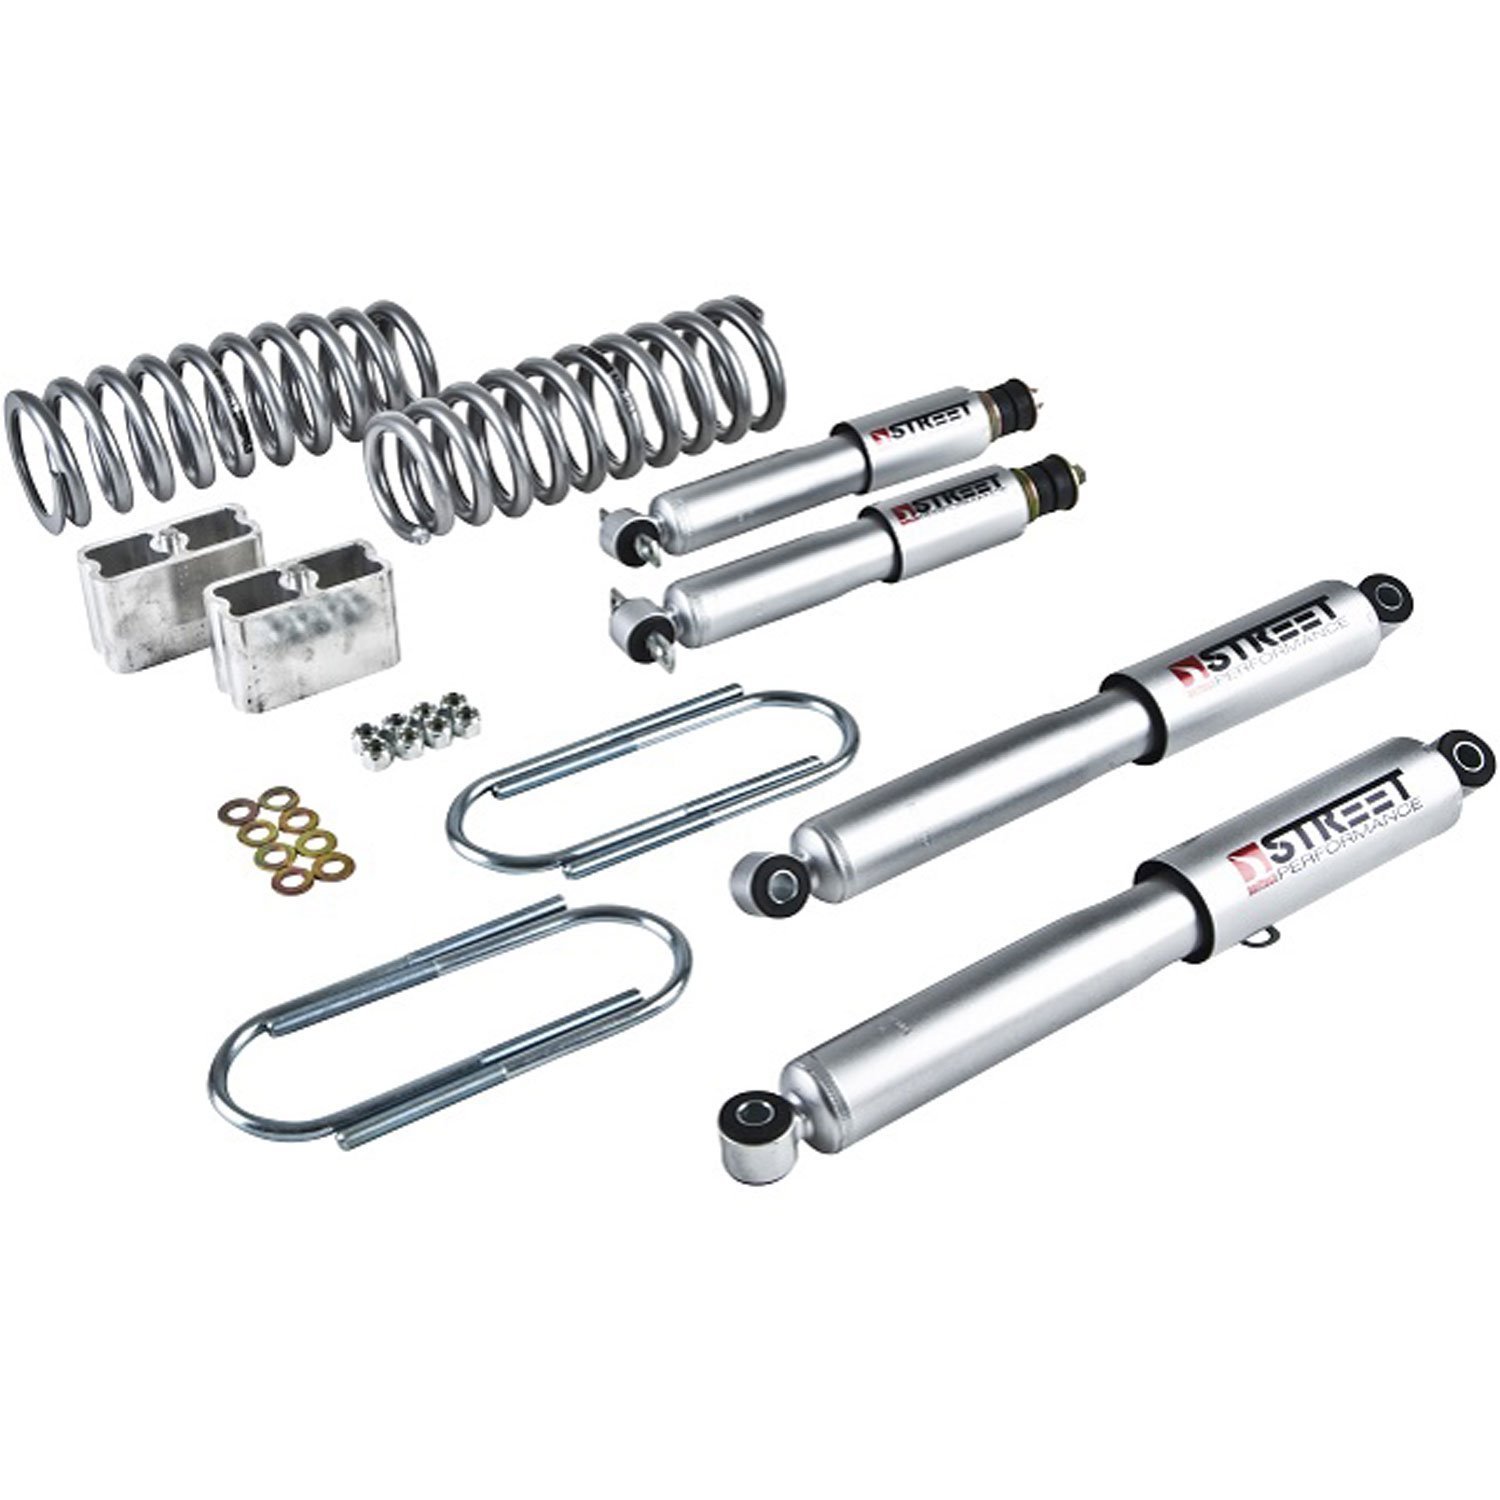 Lowering Kit for 1996-2004 Toyota Tacoma